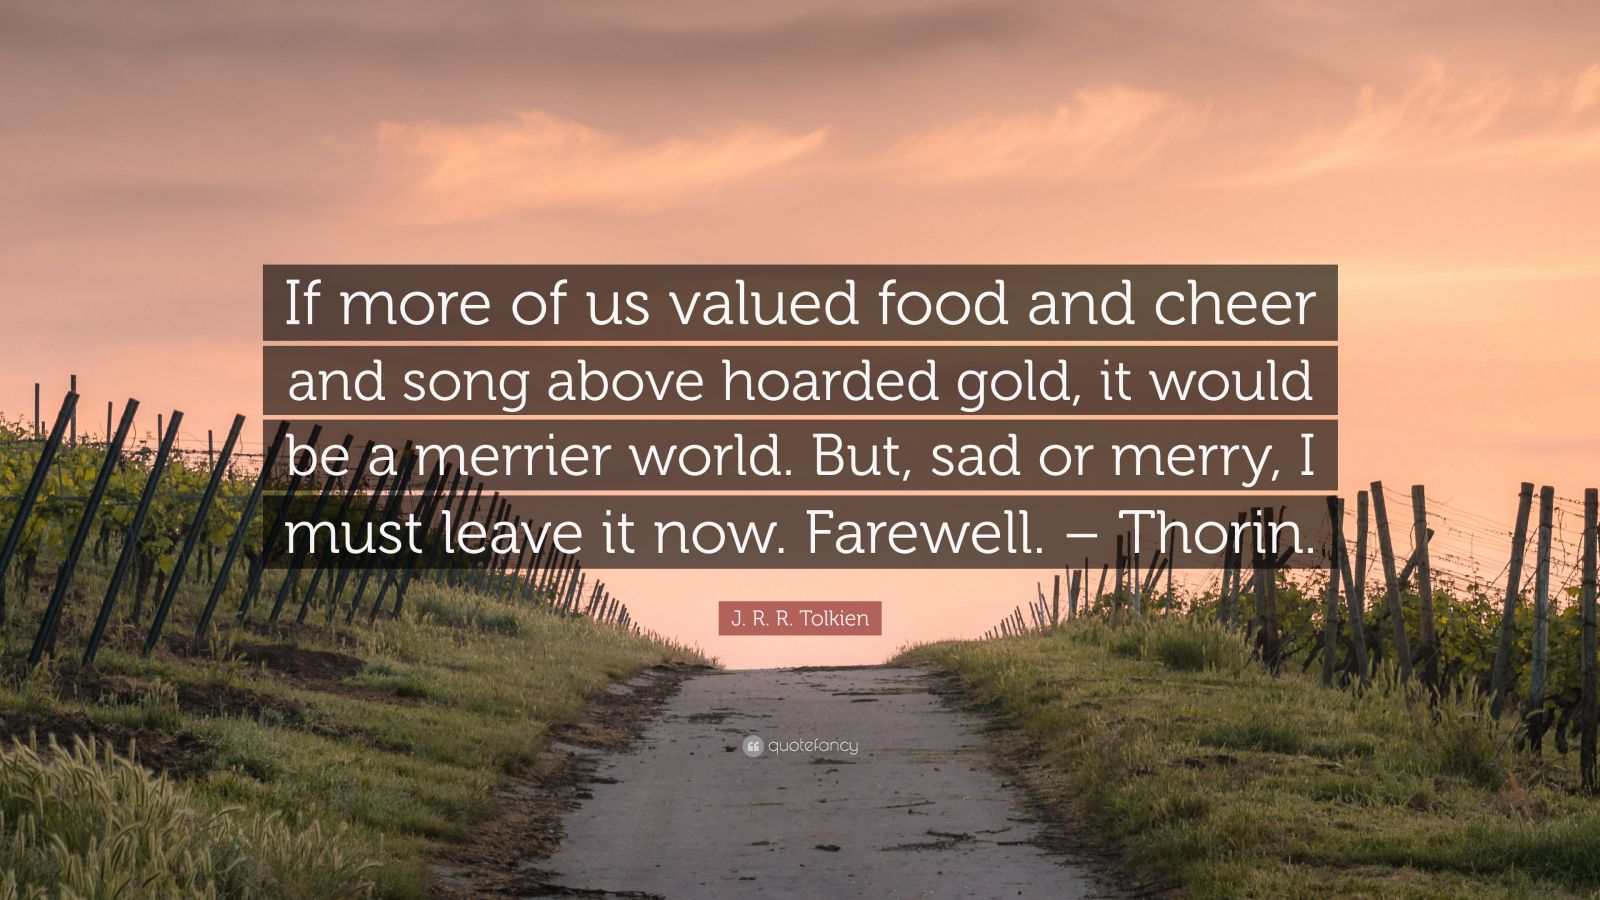 j-r-r-tolkien-quote-if-more-of-us-valued-food-and-cheer-and-song